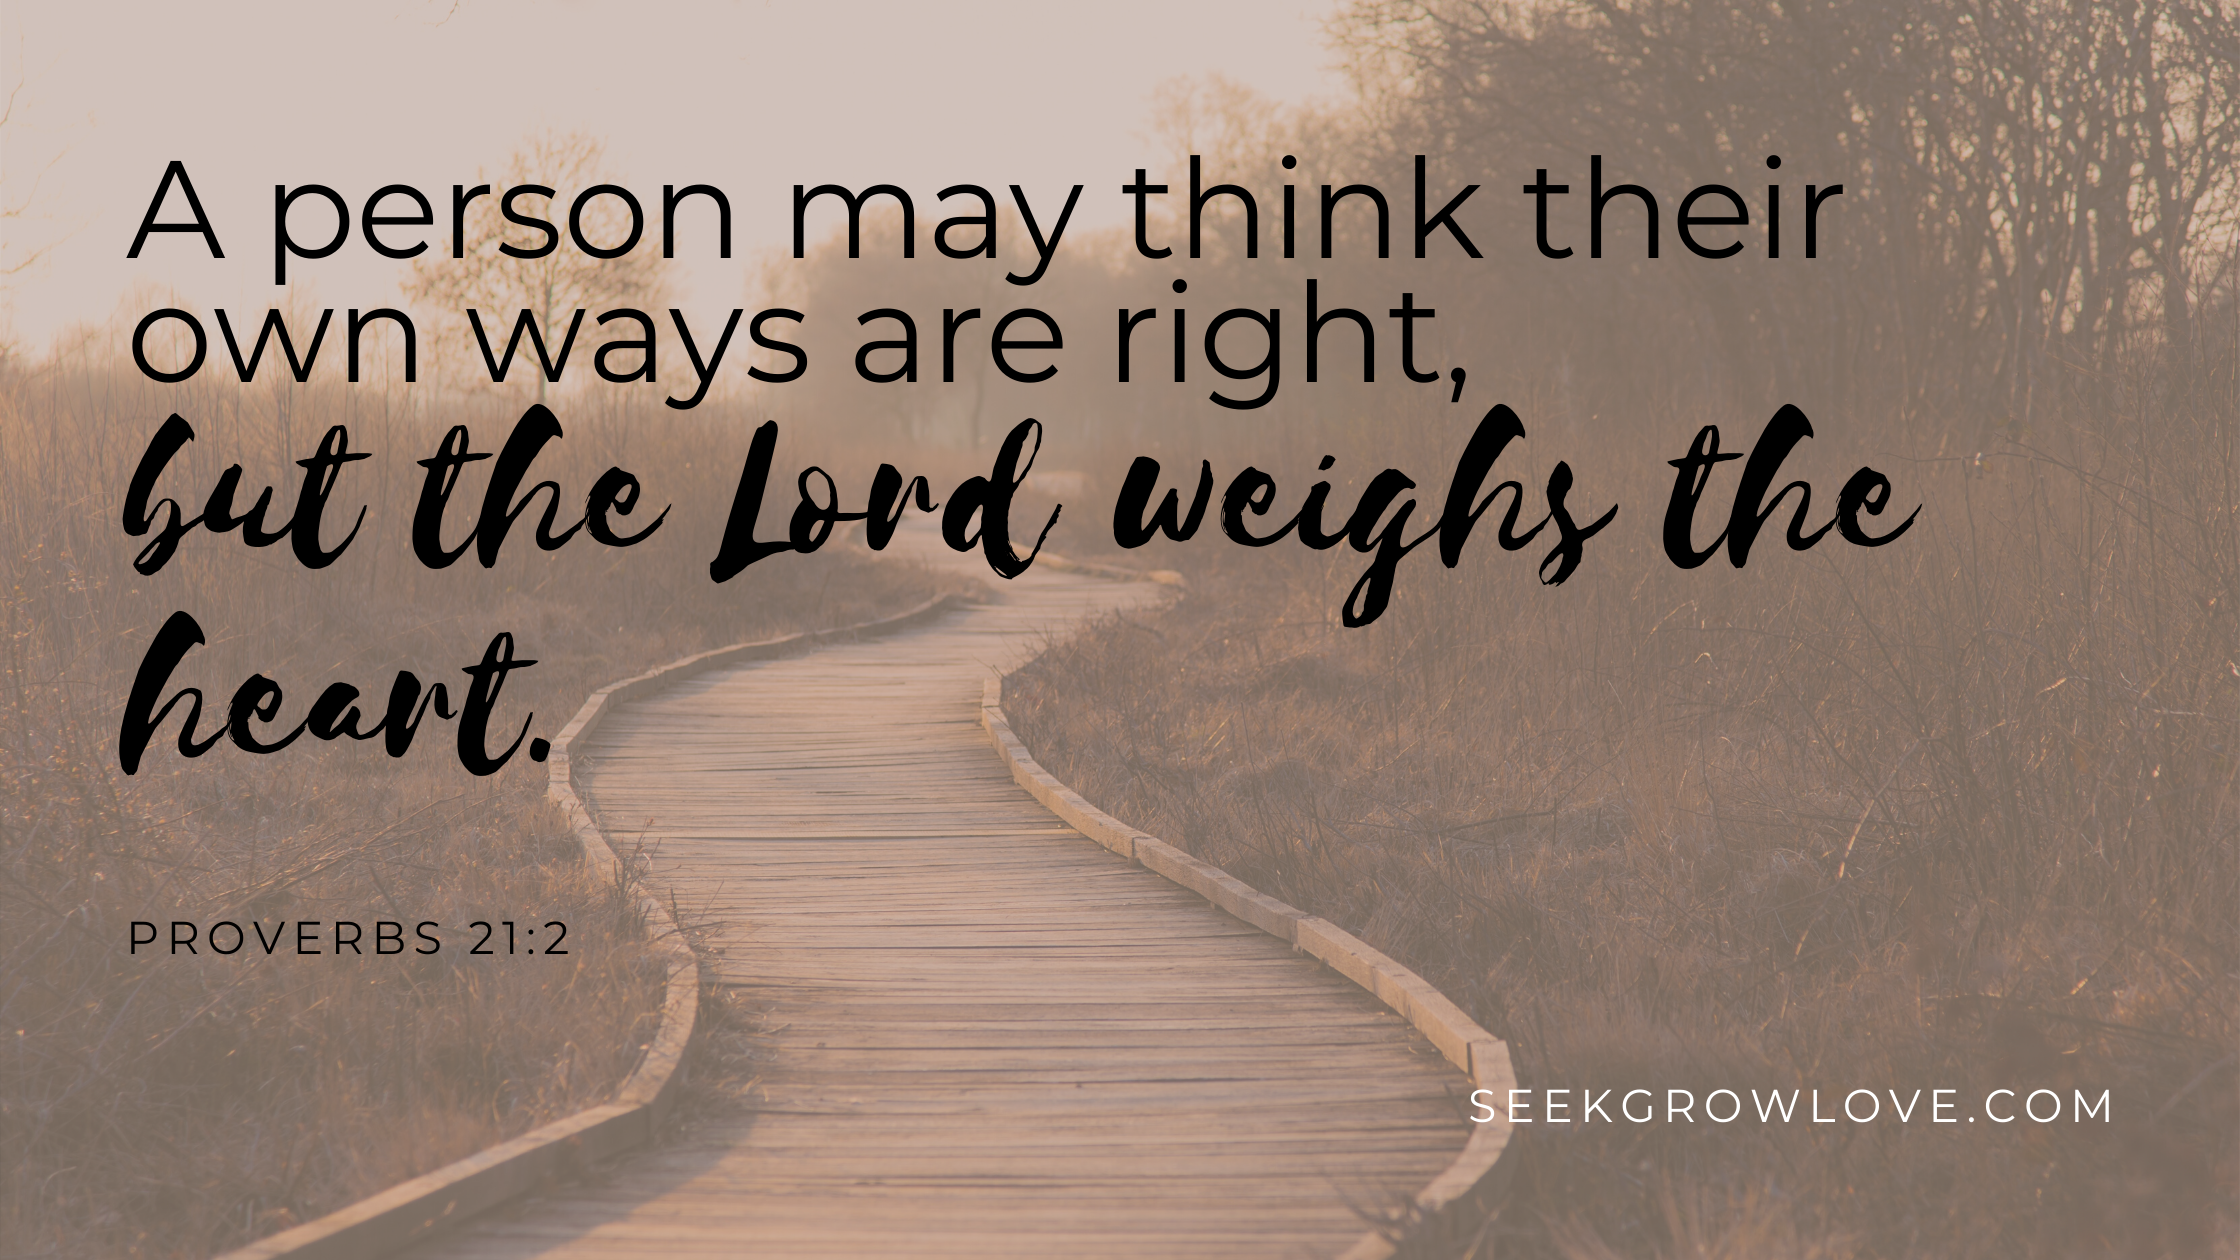 A person may think their own ways are right, but the Lord weighs the heart.